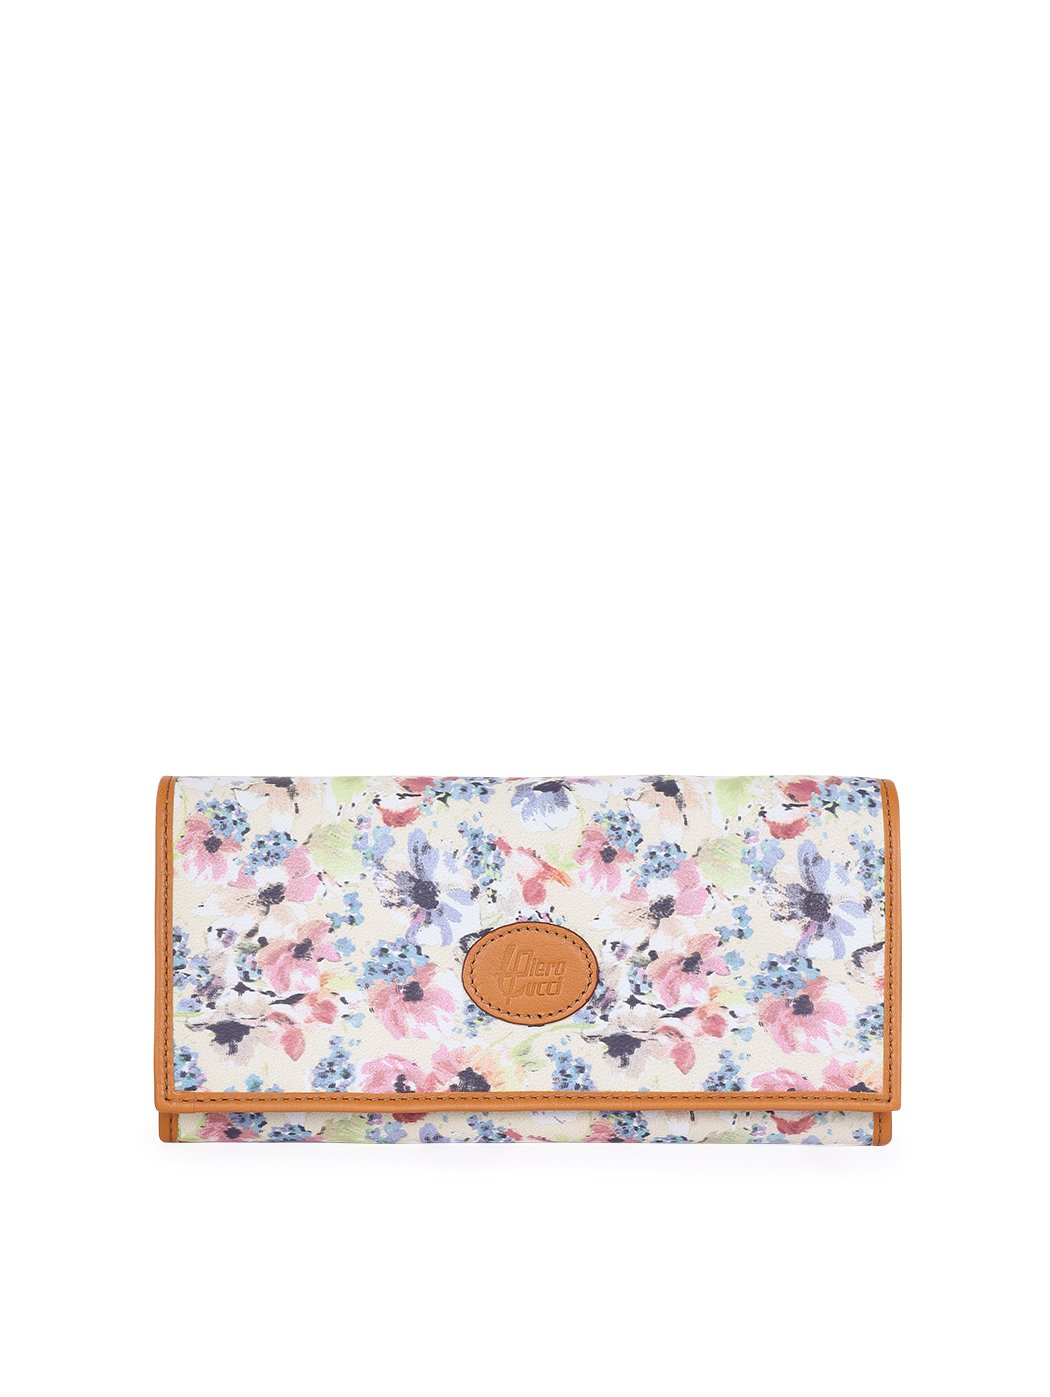 Floral printed leather wallet